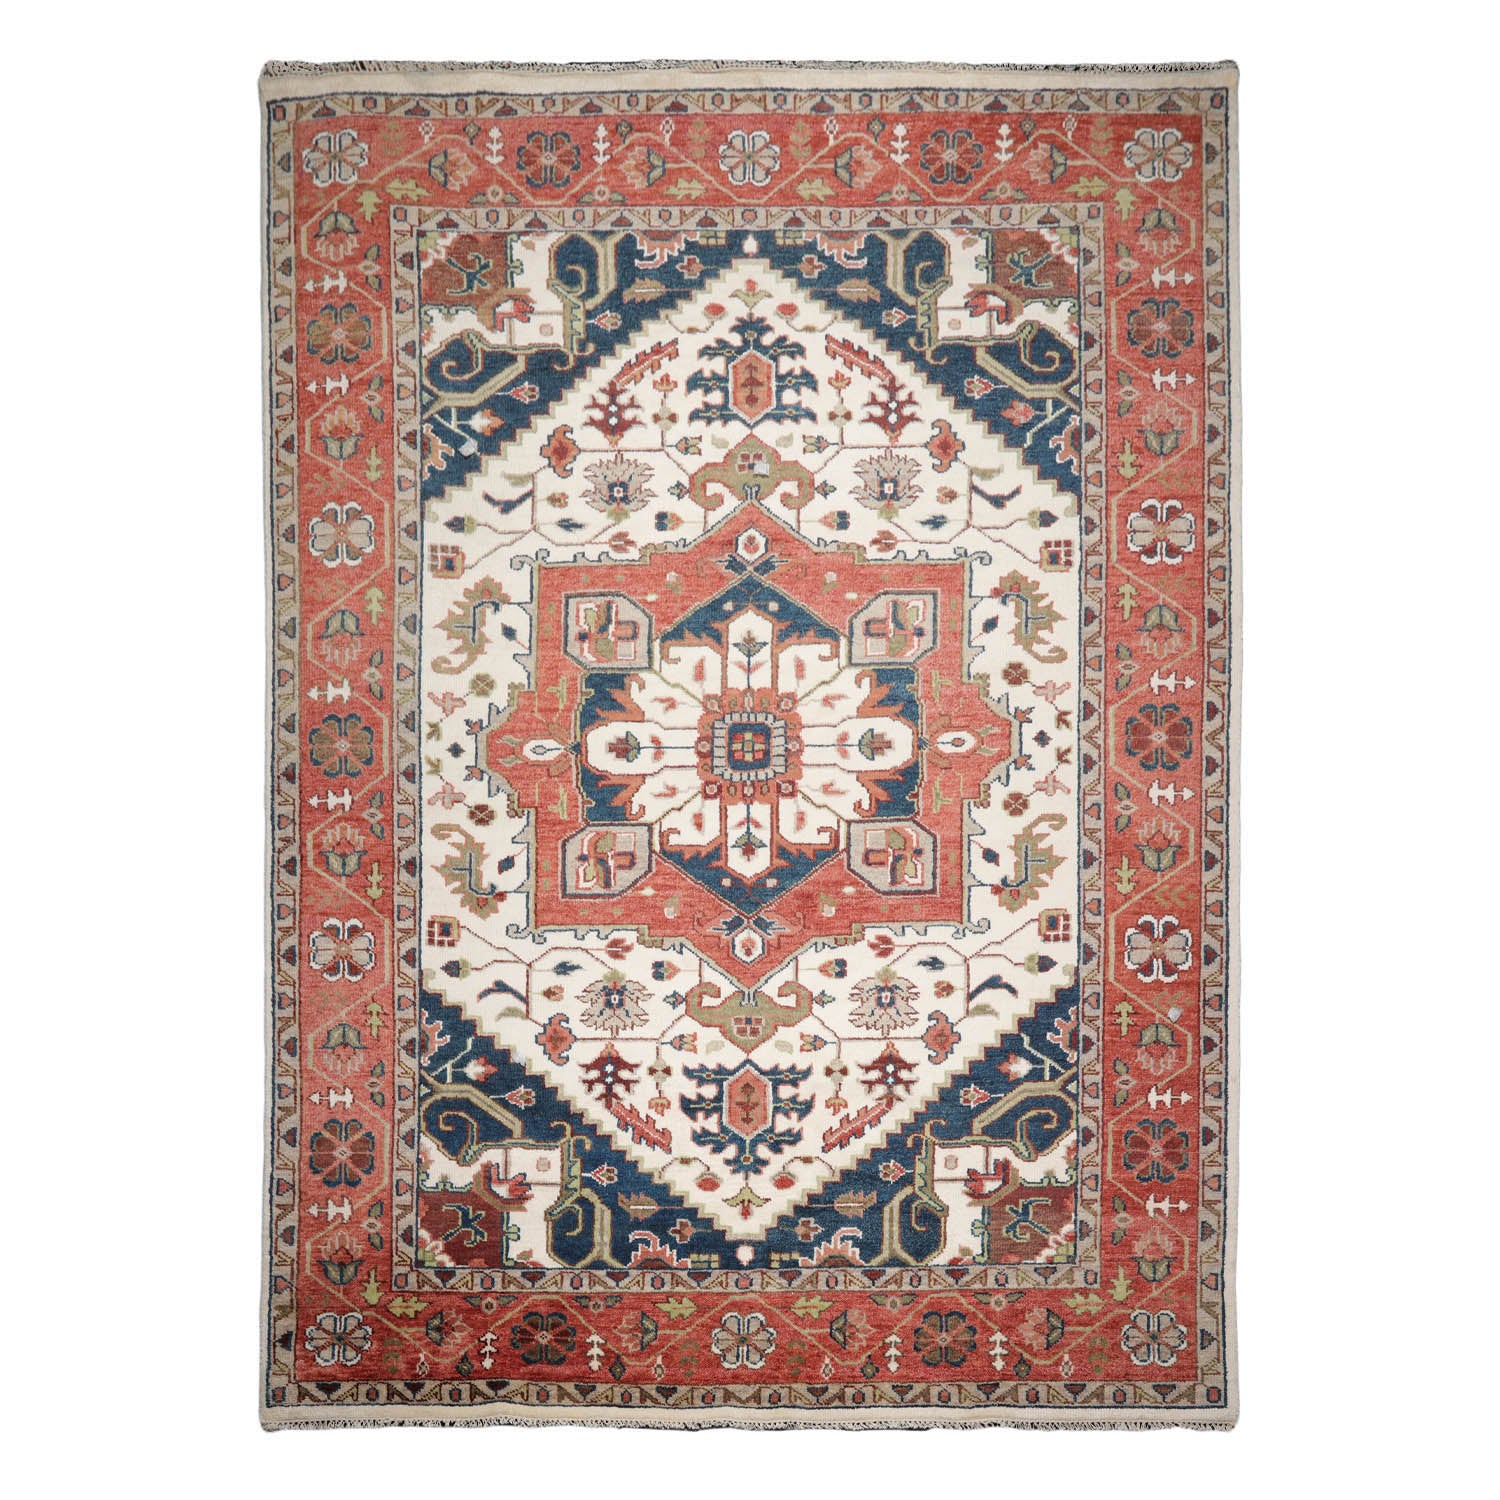 Alleya 10x14 Hand Knotted 100% Wool Heriz Traditional Oriental Area Rug Cream, Salmon Color